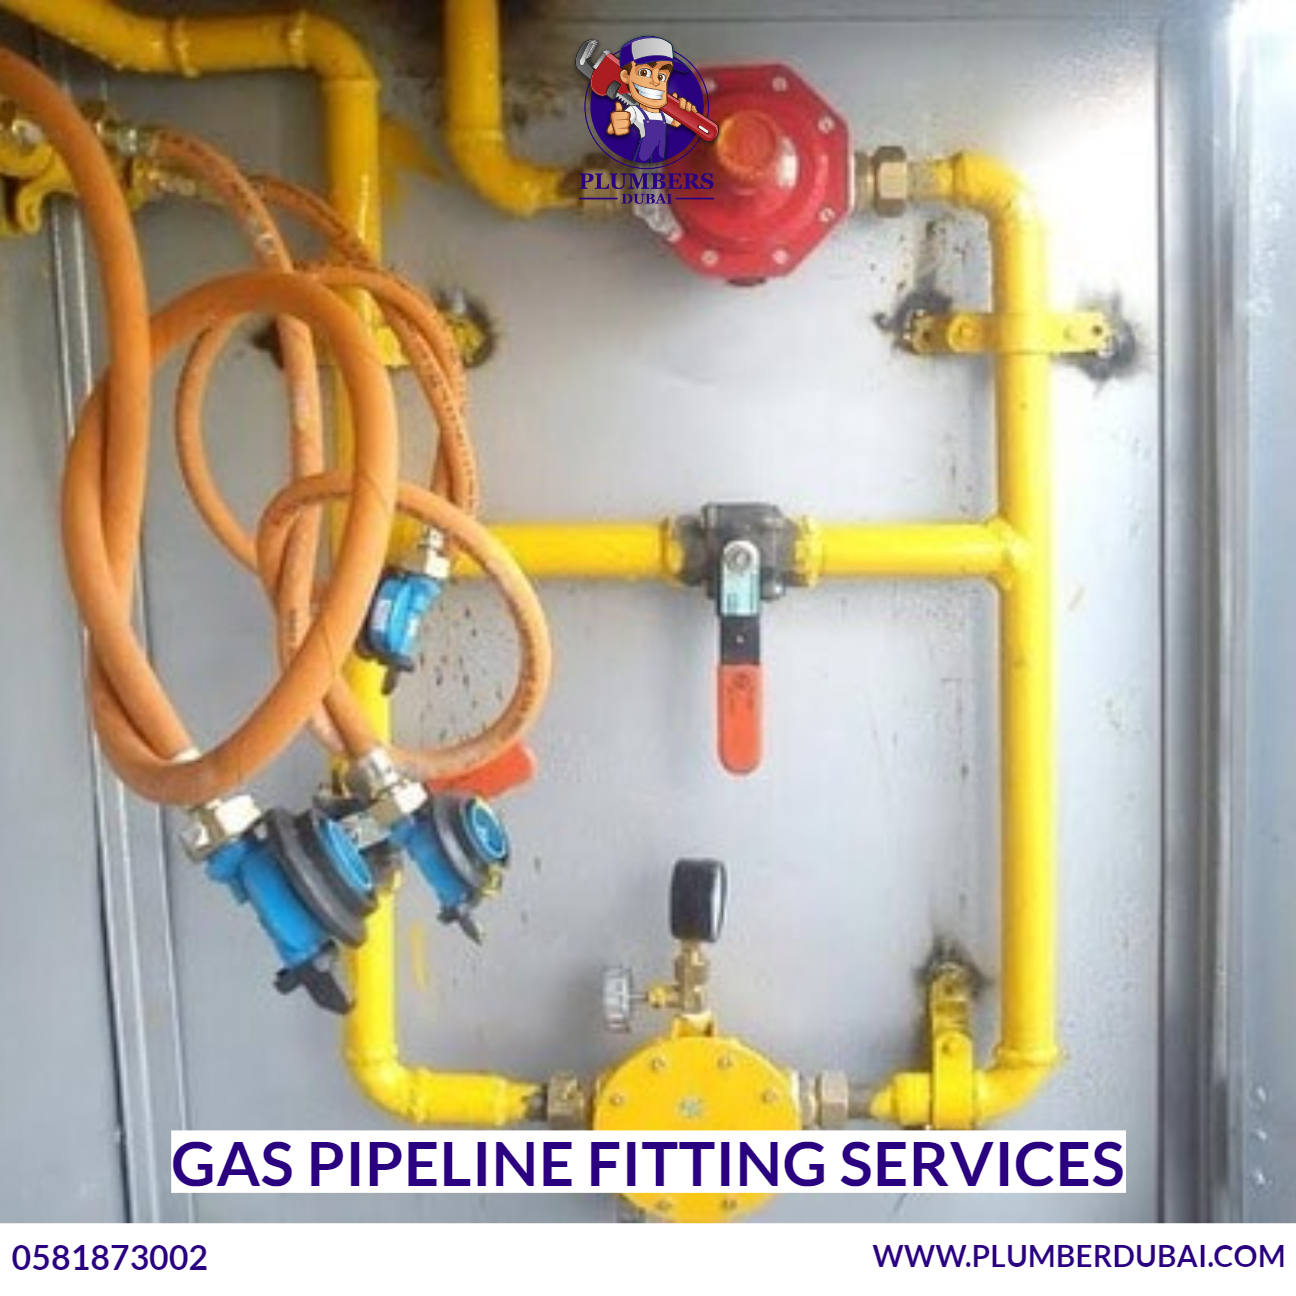 Gas pipeline fitting services